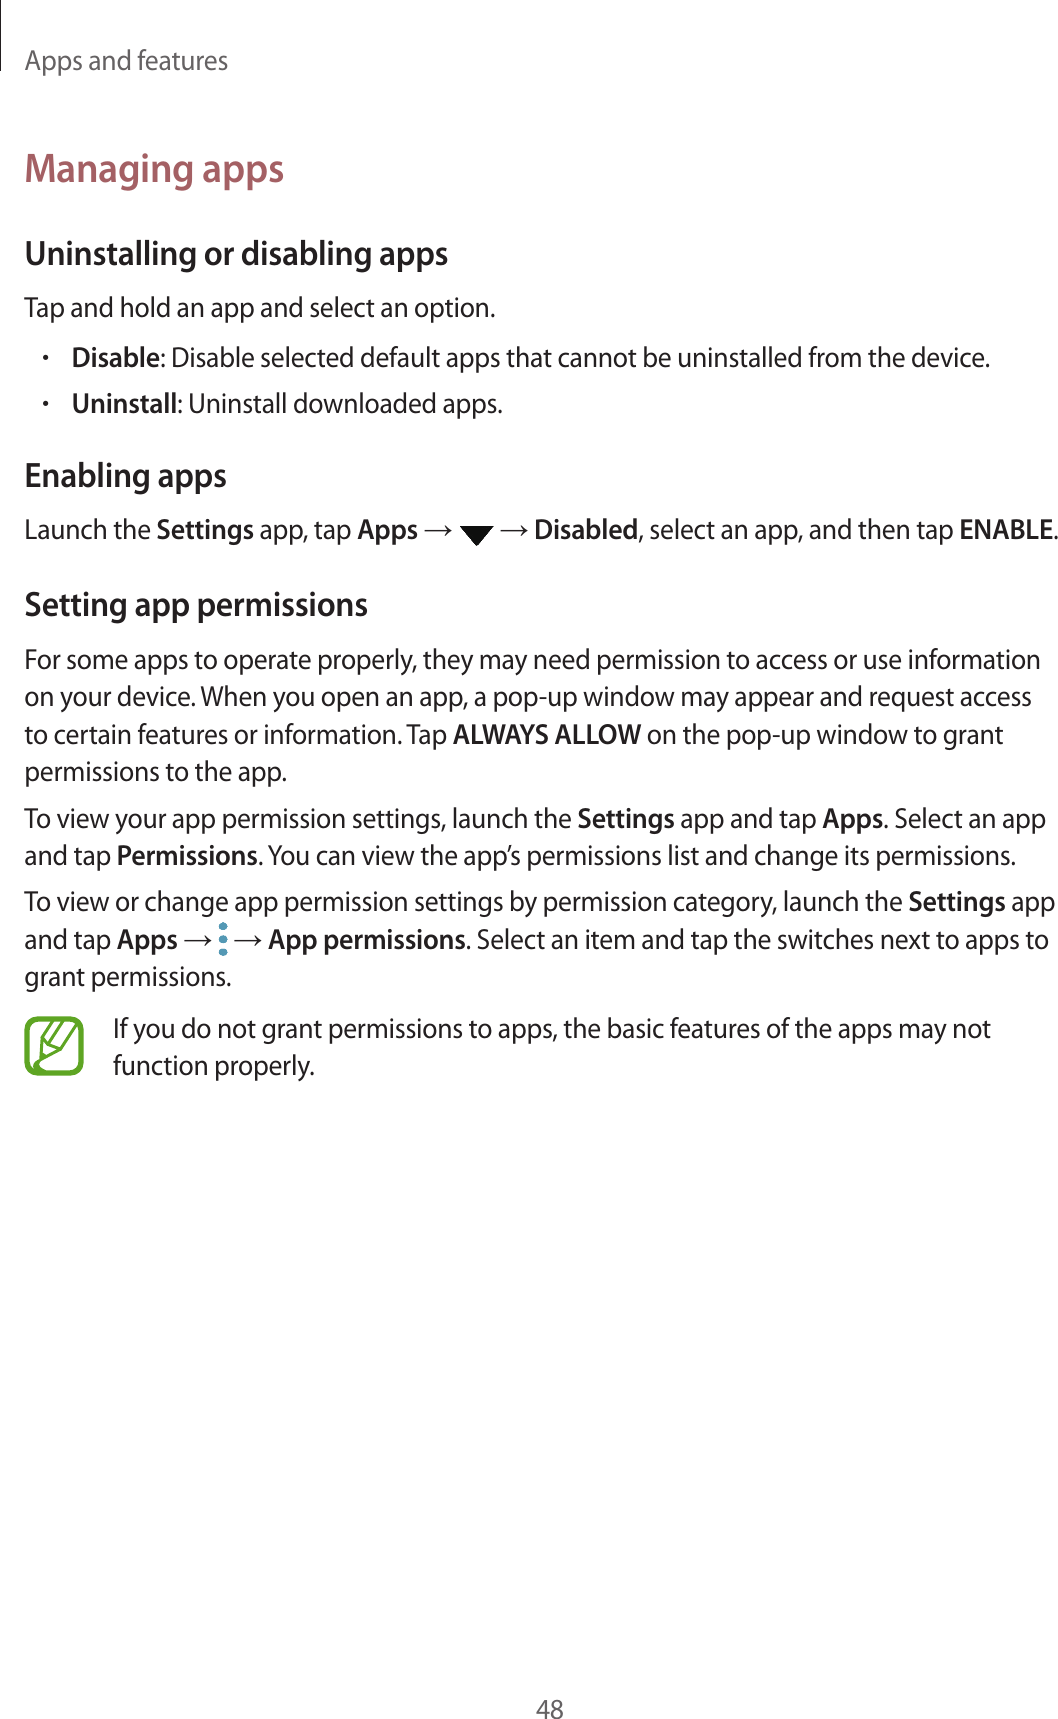 Apps and features48Managing appsUninstalling or disabling appsTap and hold an app and select an option.•Disable: Disable selected default apps that cannot be uninstalled from the device.•Uninstall: Uninstall downloaded apps.Enabling appsLaunch the Settings app, tap Apps →   → Disabled, select an app, and then tap ENABLE.Setting app permissionsFor some apps to operate properly, they may need permission to access or use information on your device. When you open an app, a pop-up window may appear and request access to certain features or information. Tap ALWAYS ALLOW on the pop-up window to grant permissions to the app.To view your app permission settings, launch the Settings app and tap Apps. Select an app and tap Permissions. You can view the app’s permissions list and change its permissions.To view or change app permission settings by permission category, launch the Settings app and tap Apps →   → App permissions. Select an item and tap the switches next to apps to grant permissions.If you do not grant permissions to apps, the basic features of the apps may not function properly.